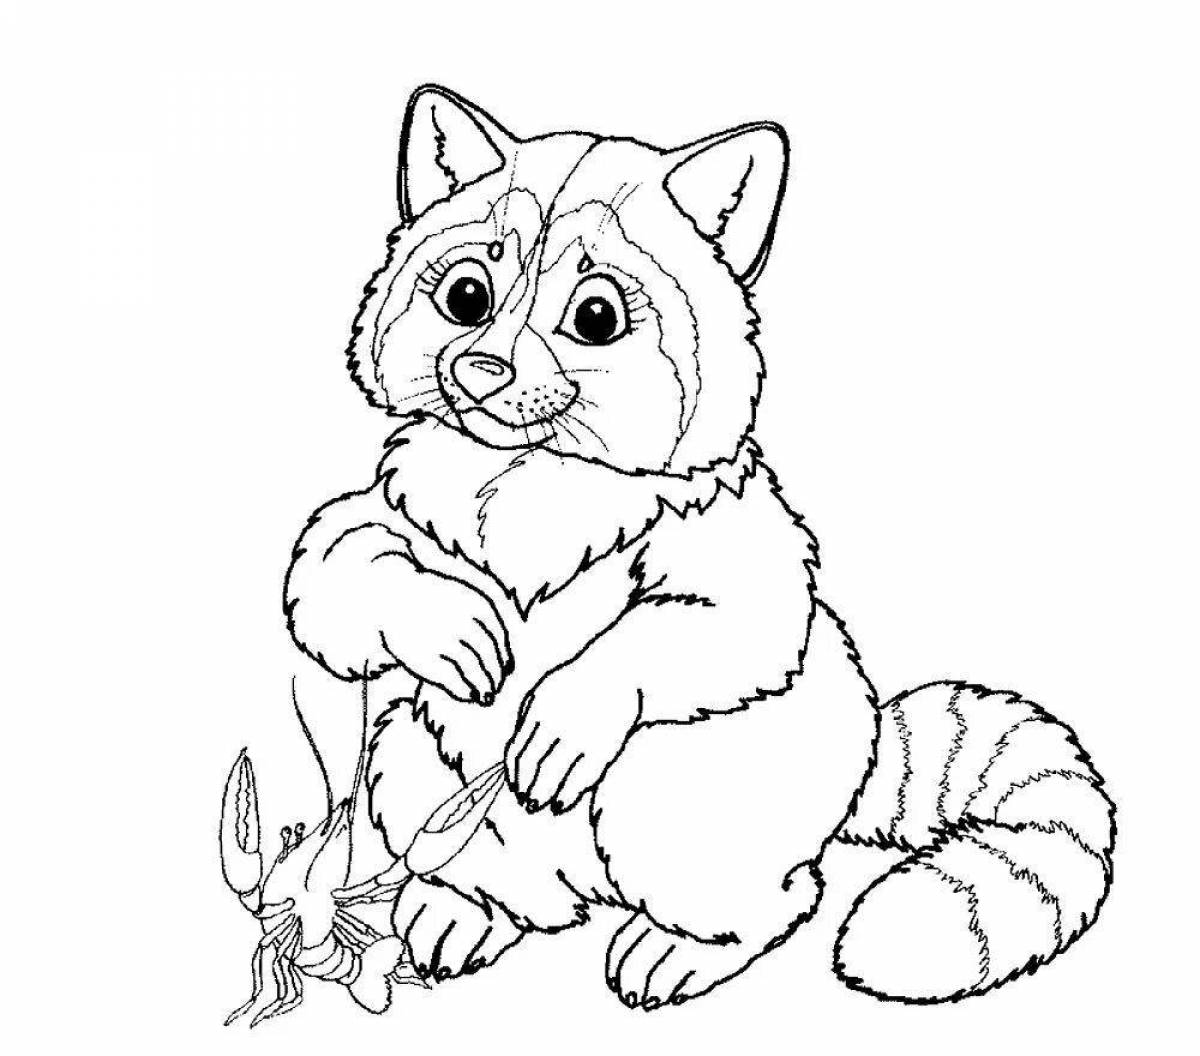 Coloring pages with live forest animals for children 5-6 years old